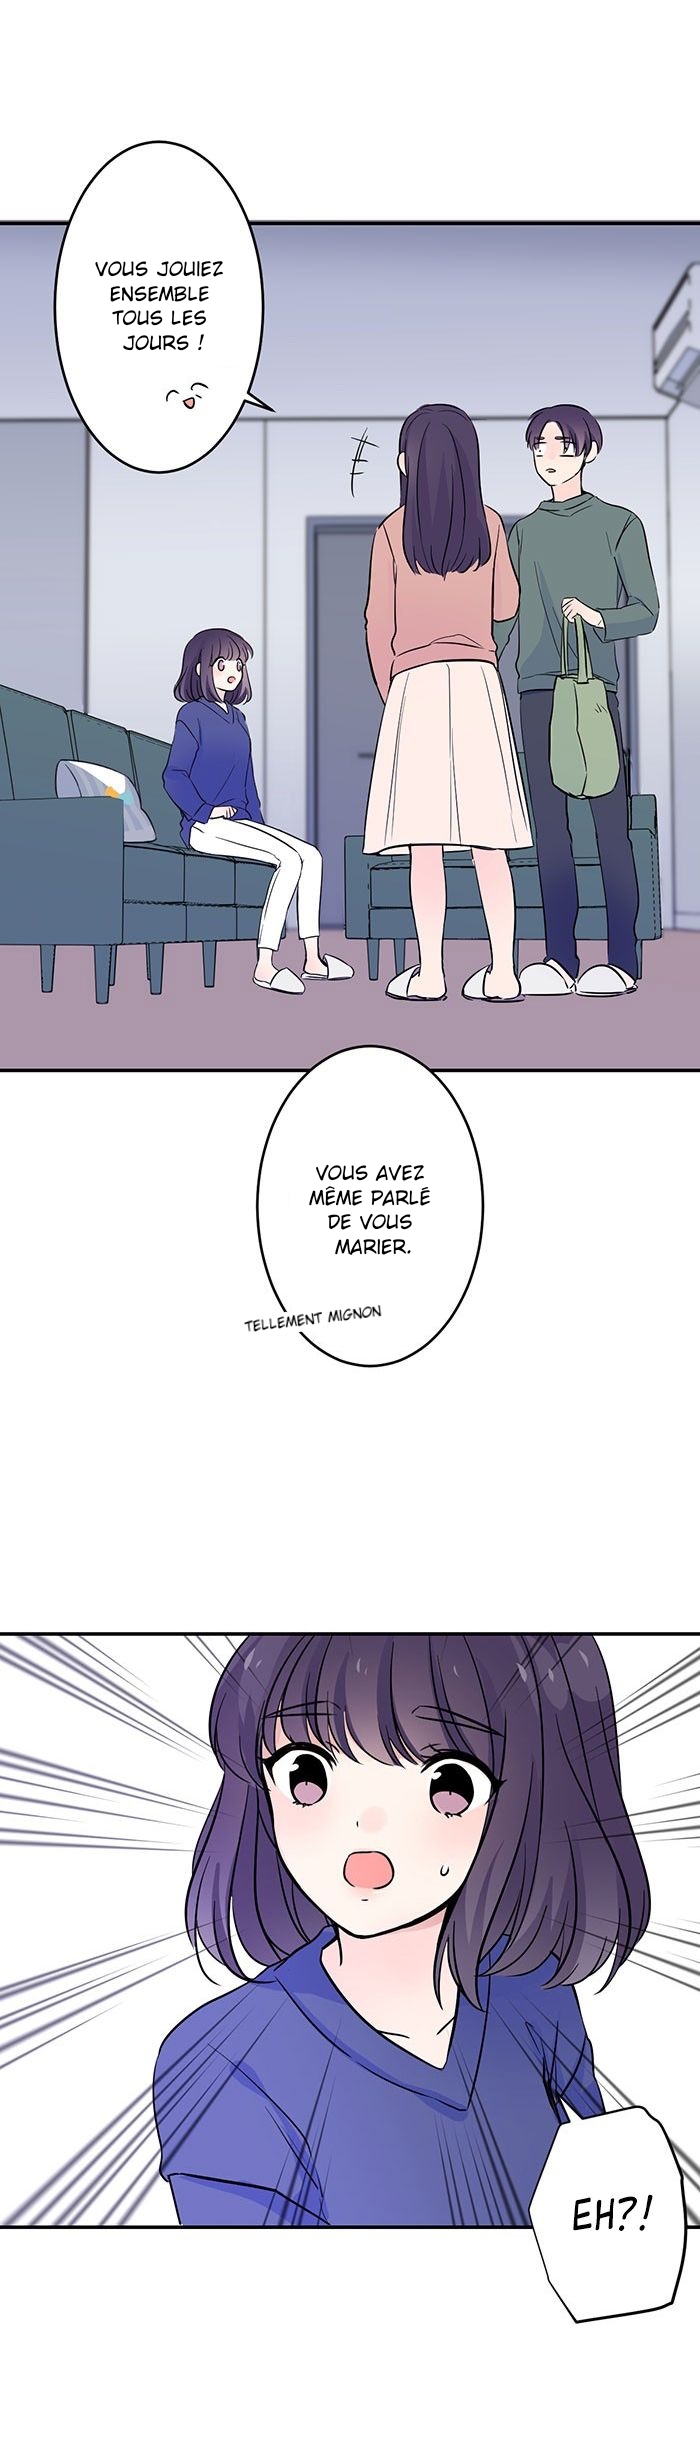 Reversed Love Route: Chapter 5 - Page 1